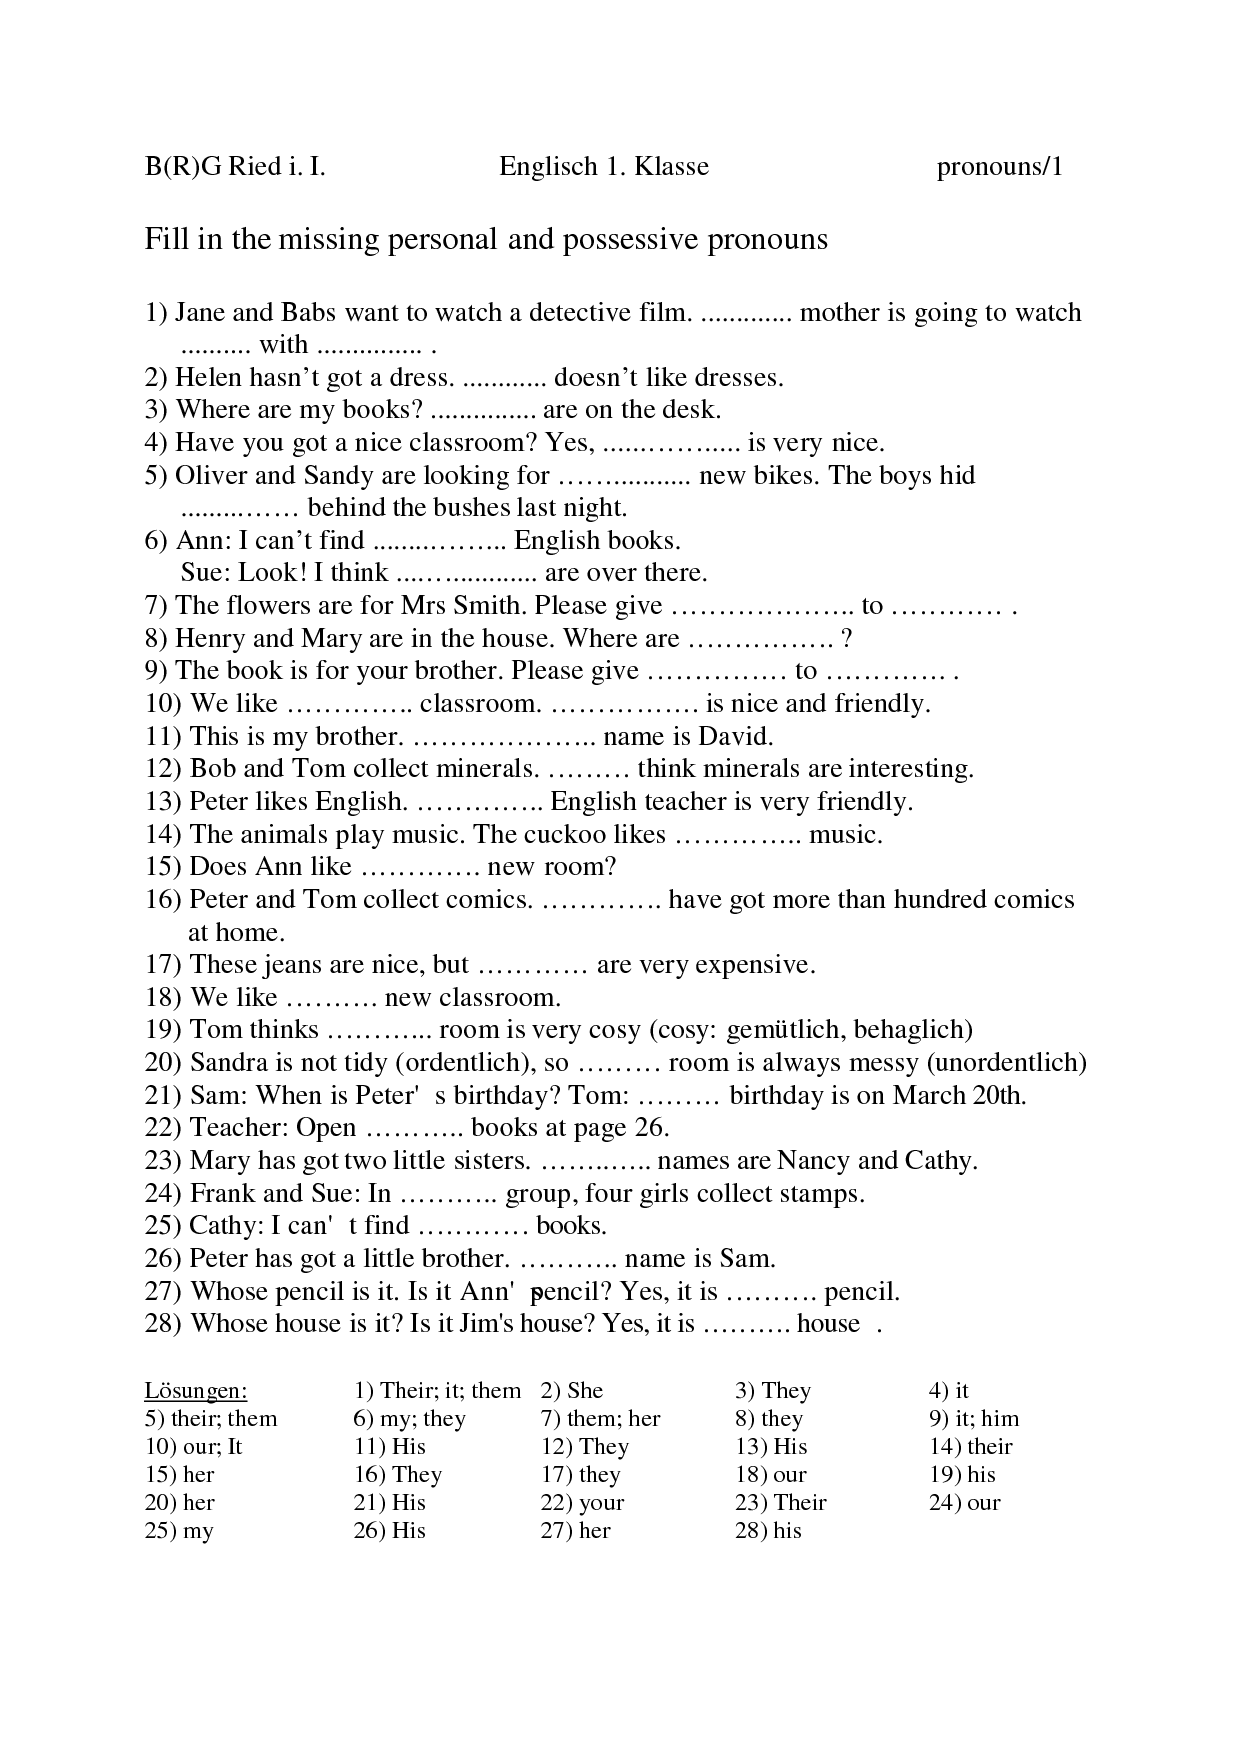 17-best-images-of-personal-and-possessive-pronouns-worksheet-printable-pronoun-worksheets